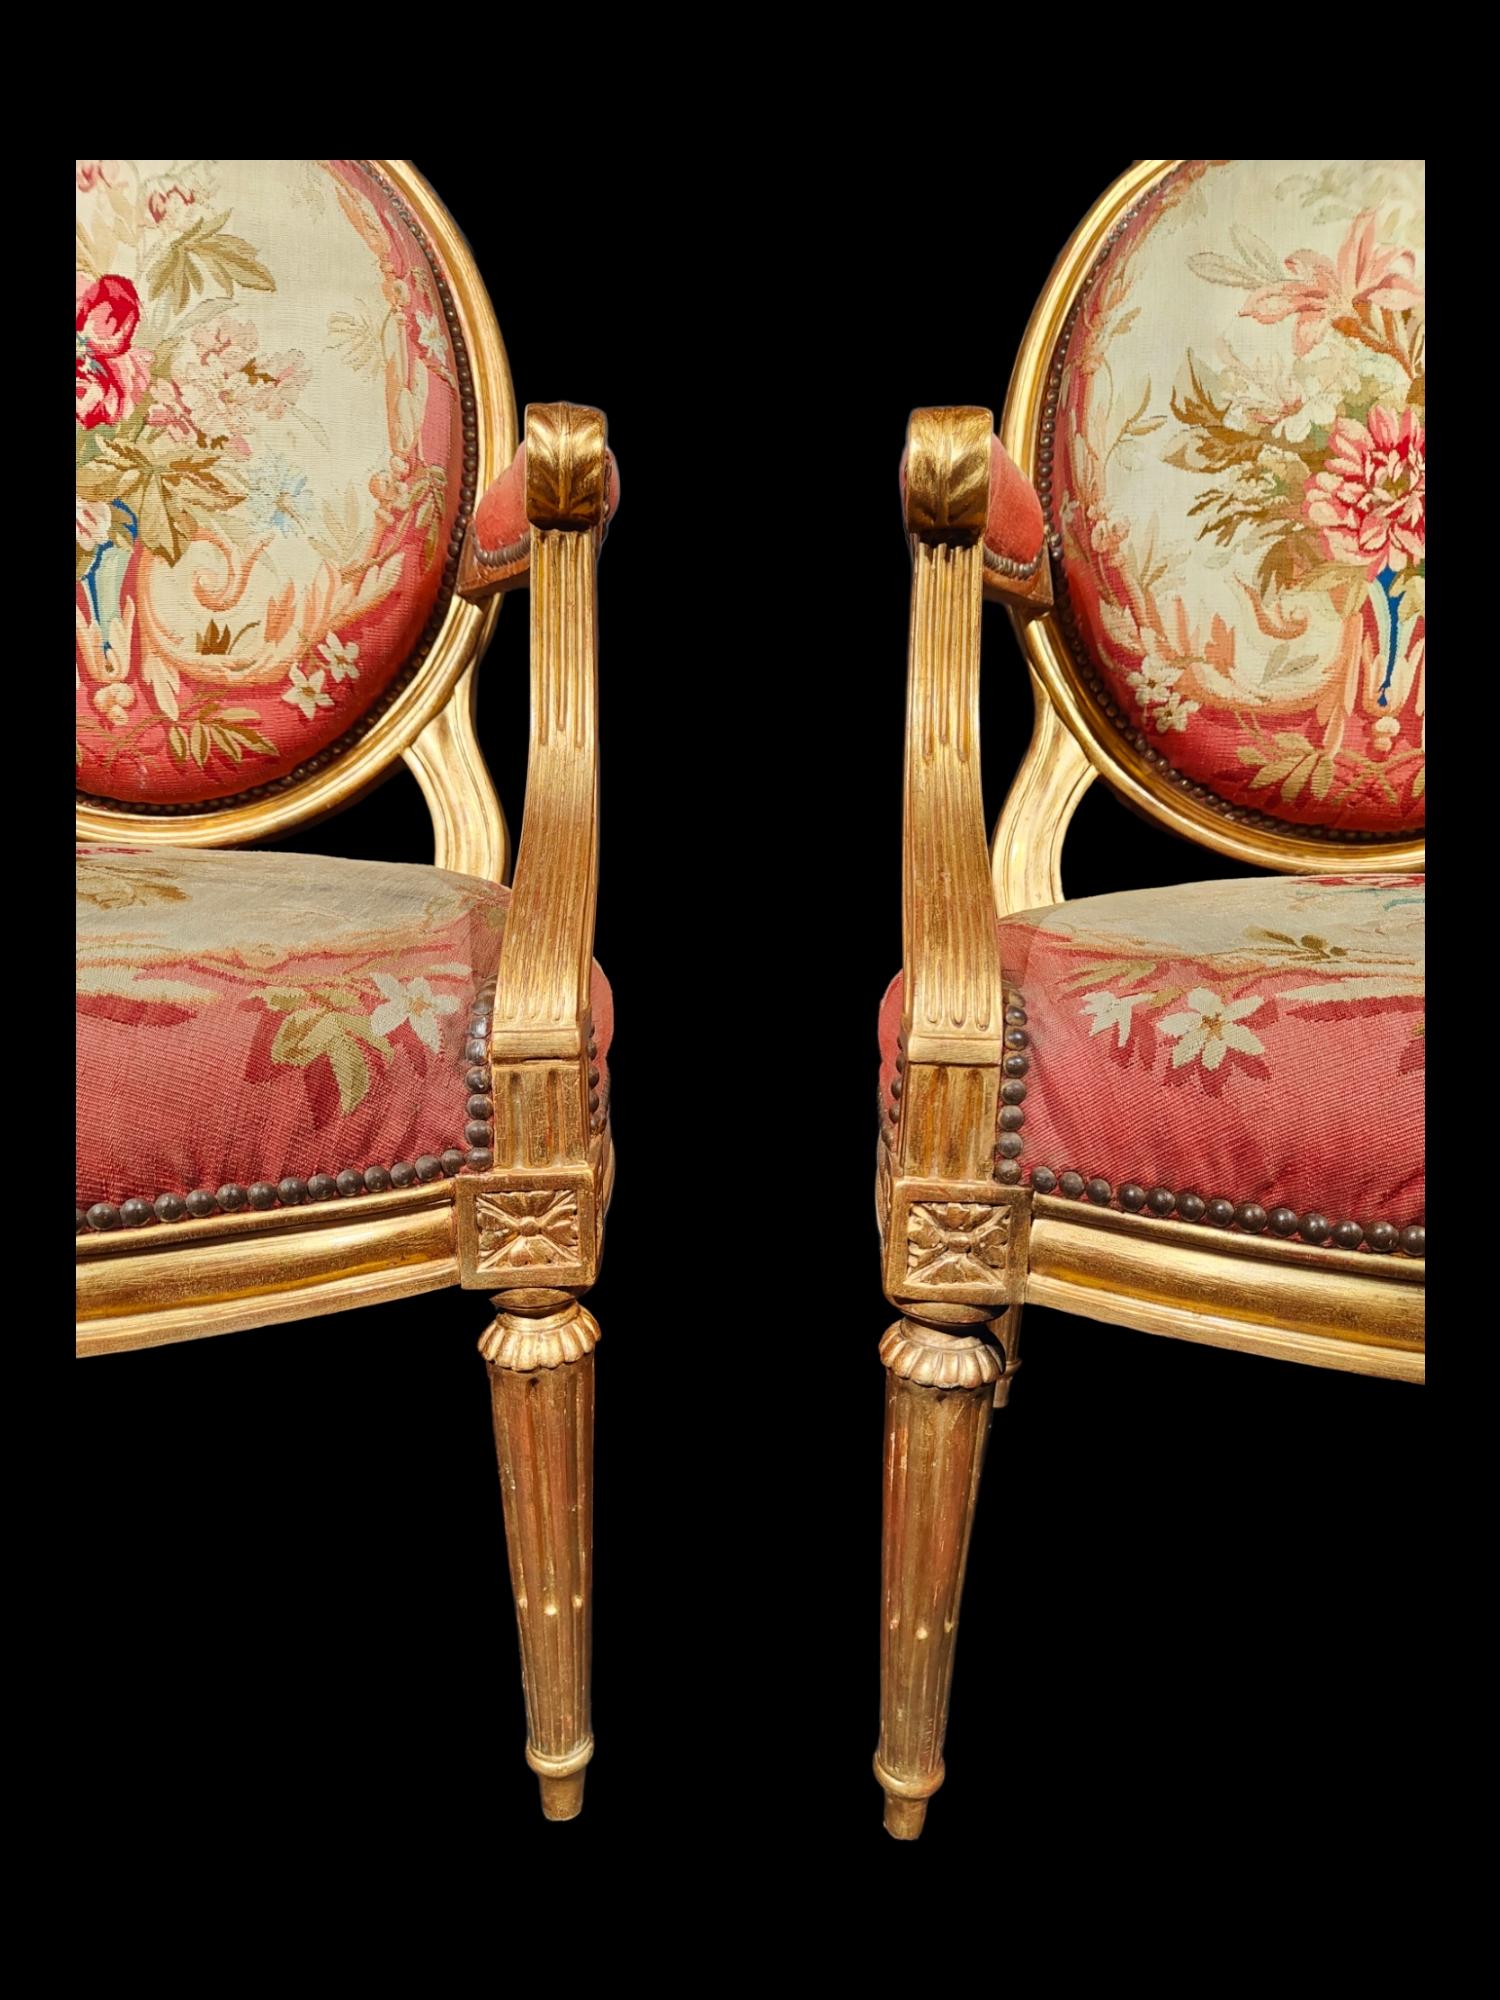 Fruitwood Important French Chairs From The 18th Century Signed By Claude Chevigny For Sale